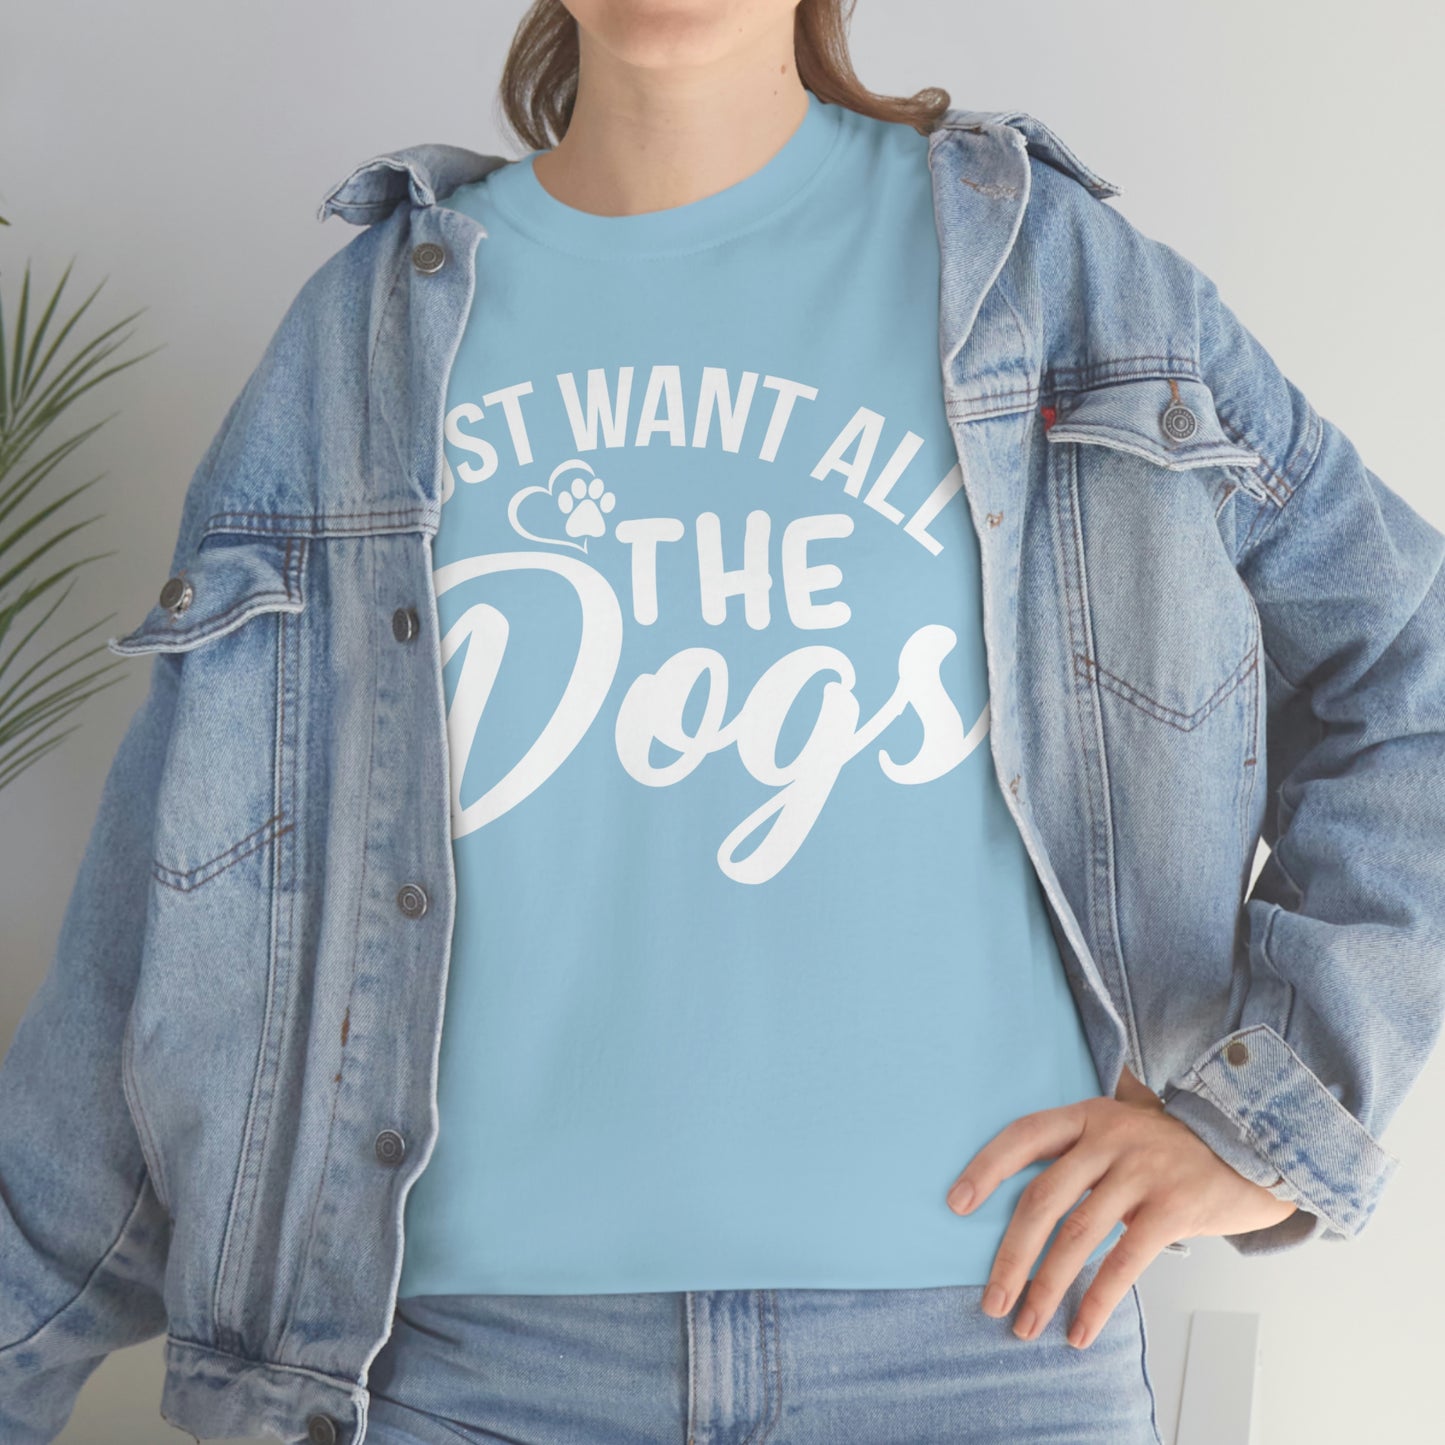 I Just want all the Dogs Cotton Tee